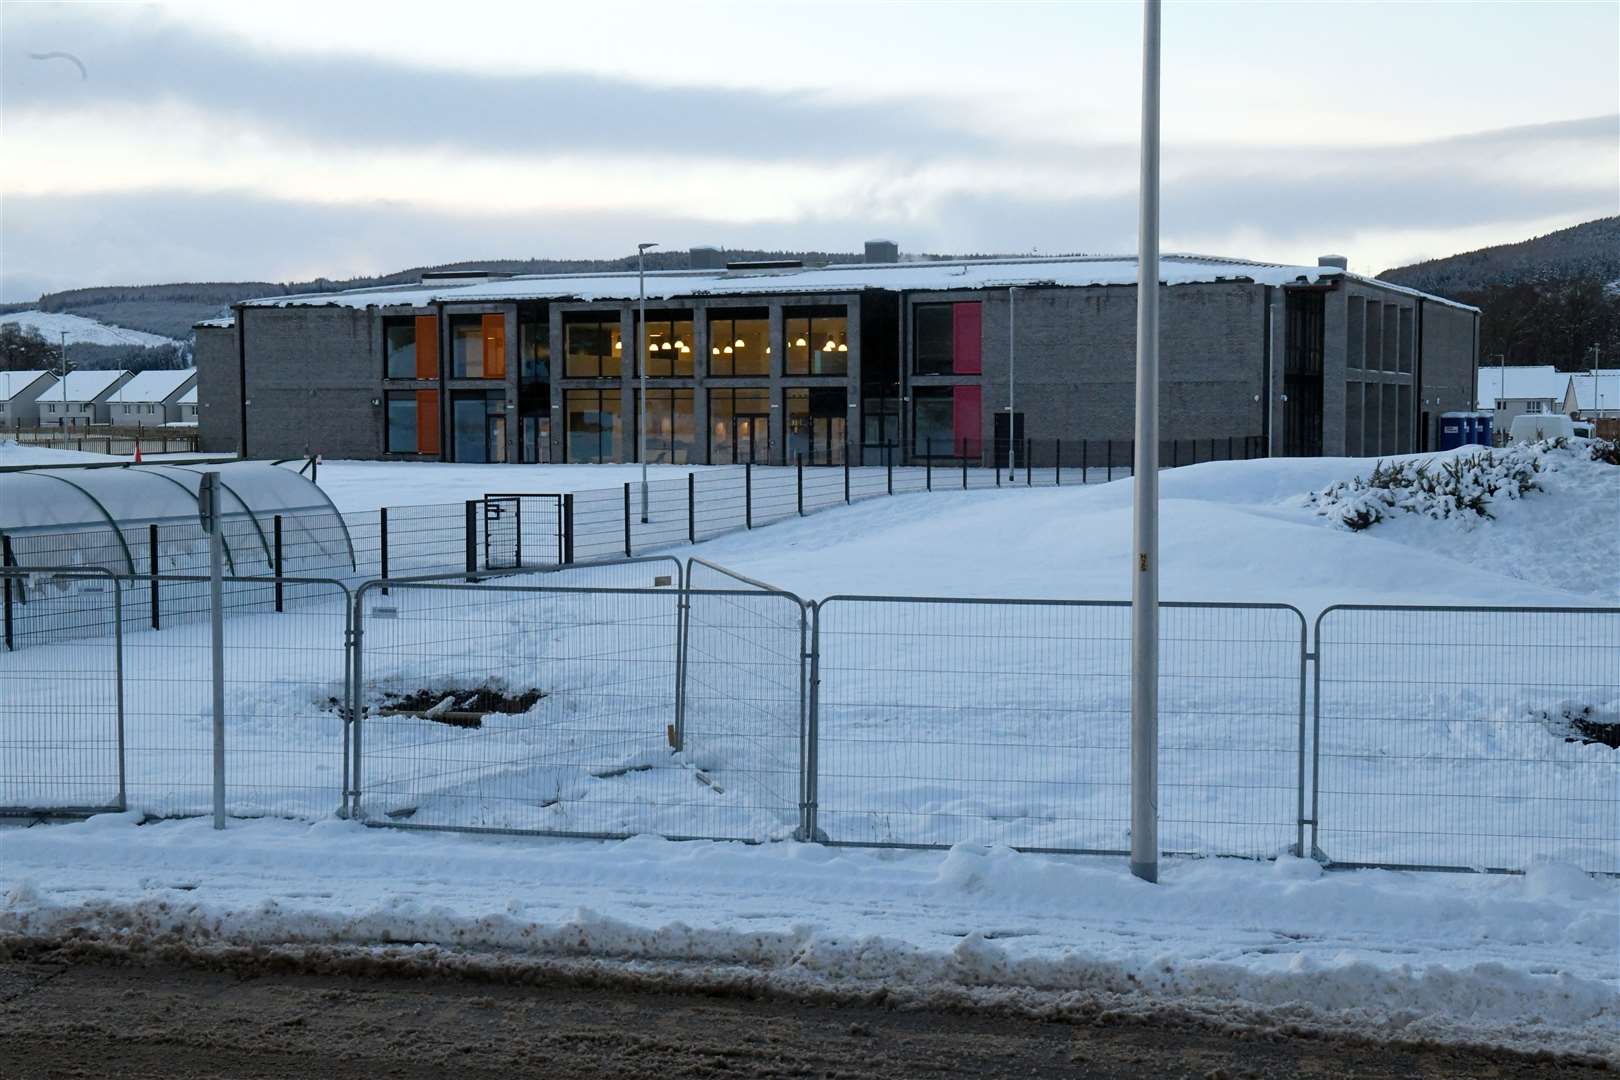 The new Ness Castle Primary School in Inverness will open its doors next month but pupils will have to wait for a sports pitch and games area to be put in place. Picture: James Mackenzie.